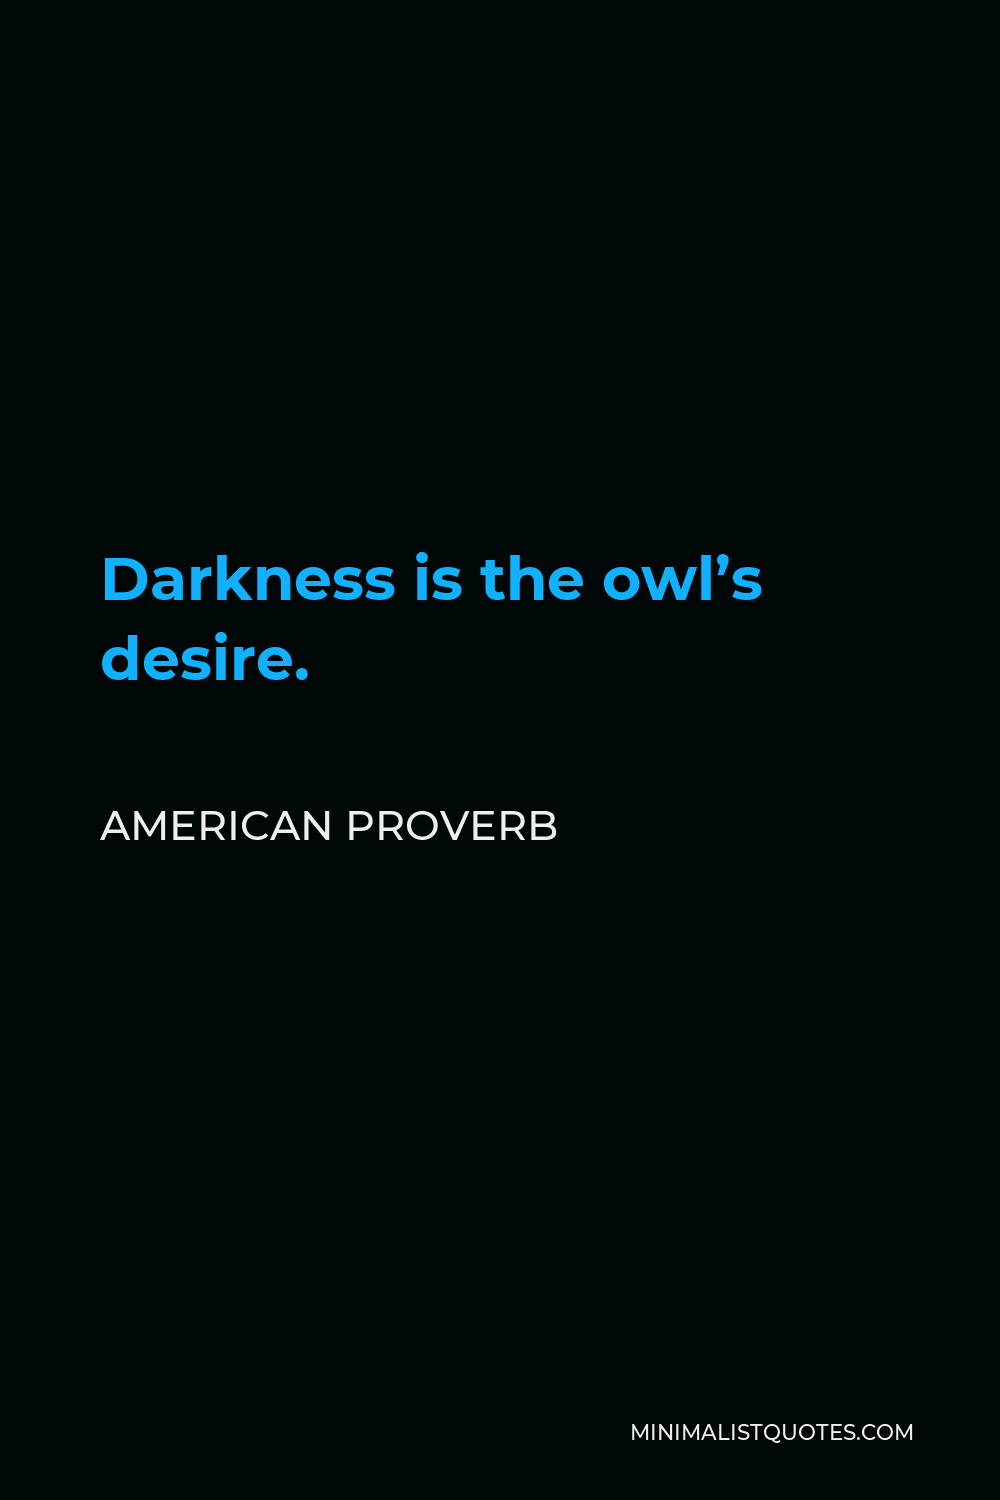 American Proverb Quote - Darkness is the owl’s desire.